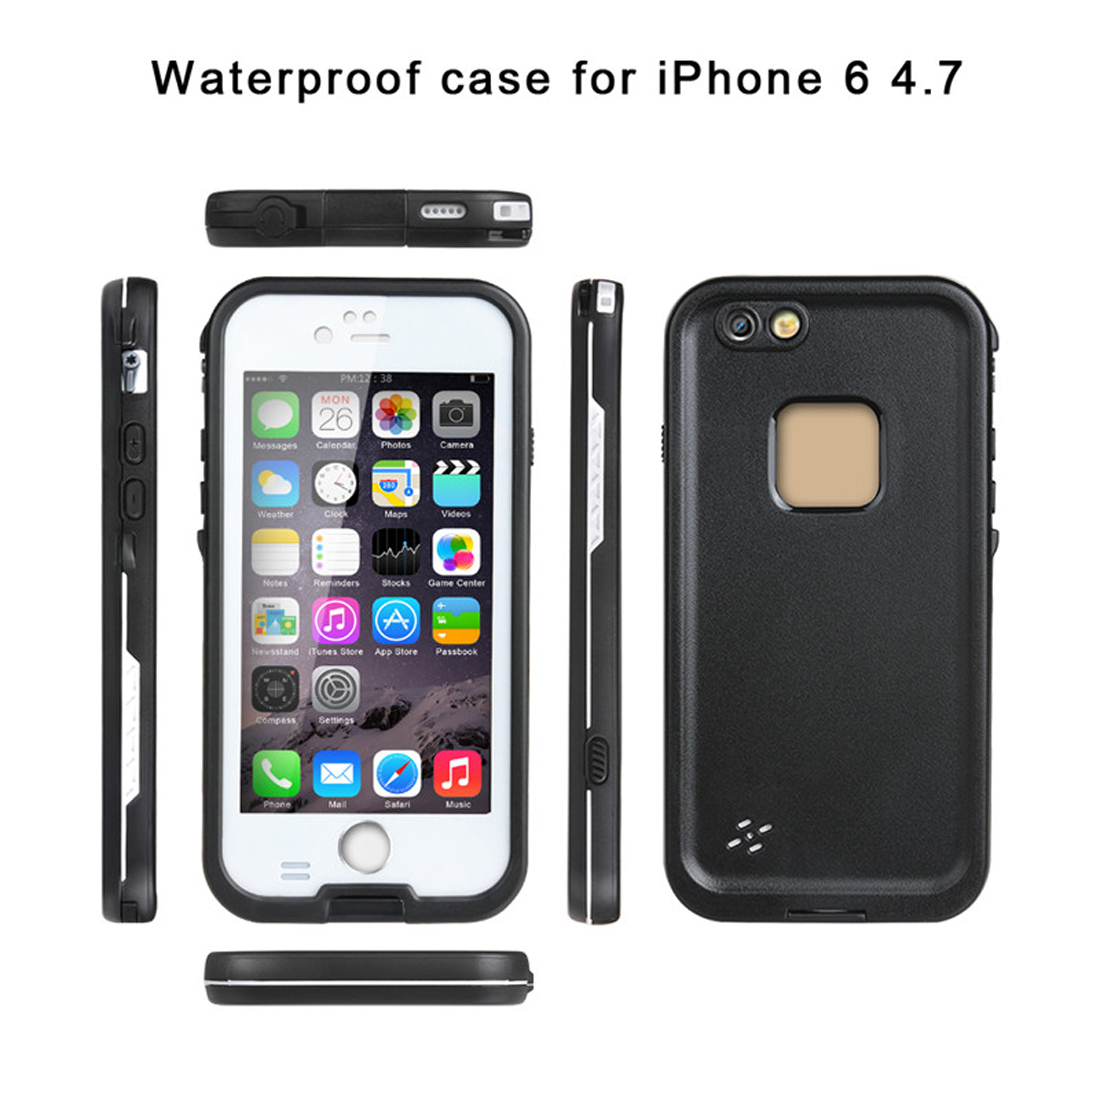 ELEGIANT for iPhone 6 4.7 inch Waterproof Case Transparent Touch Screen Shockproof Full Cover Protective Case